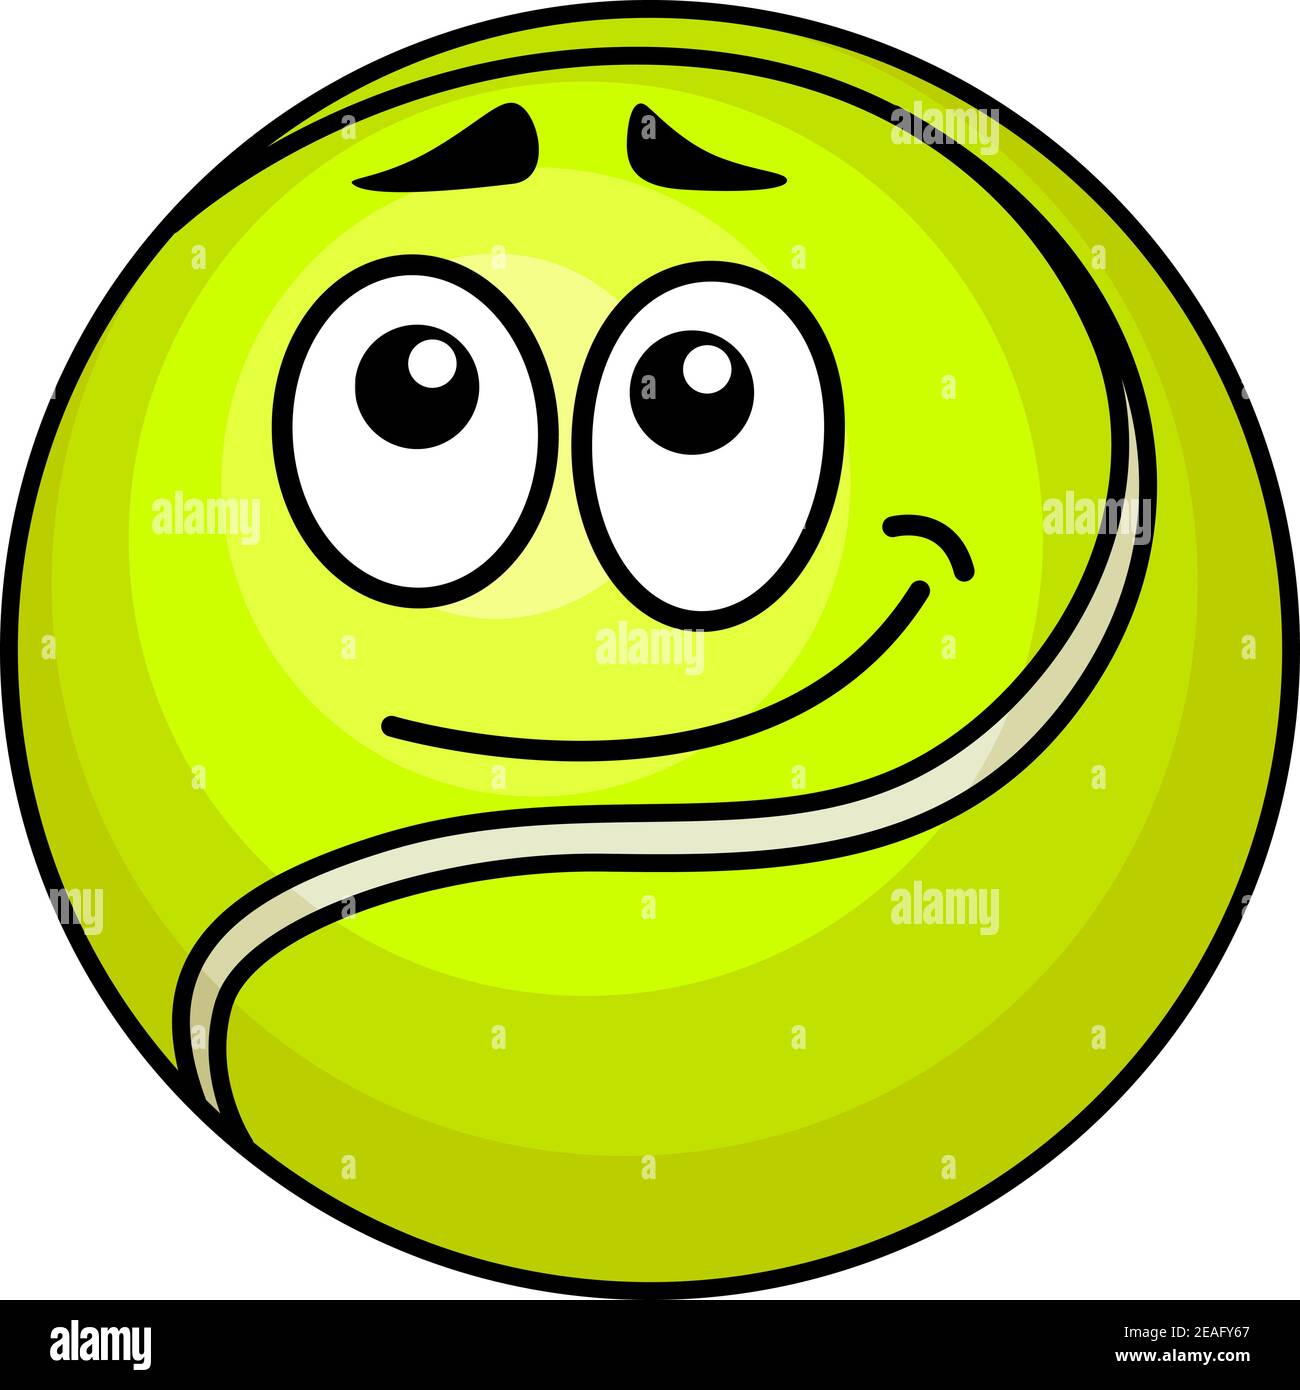 Vector illustration of a cute little fluorescent green cartoon tennis ball with a wry smile and raised eyebrows isolated on white Stock Vector